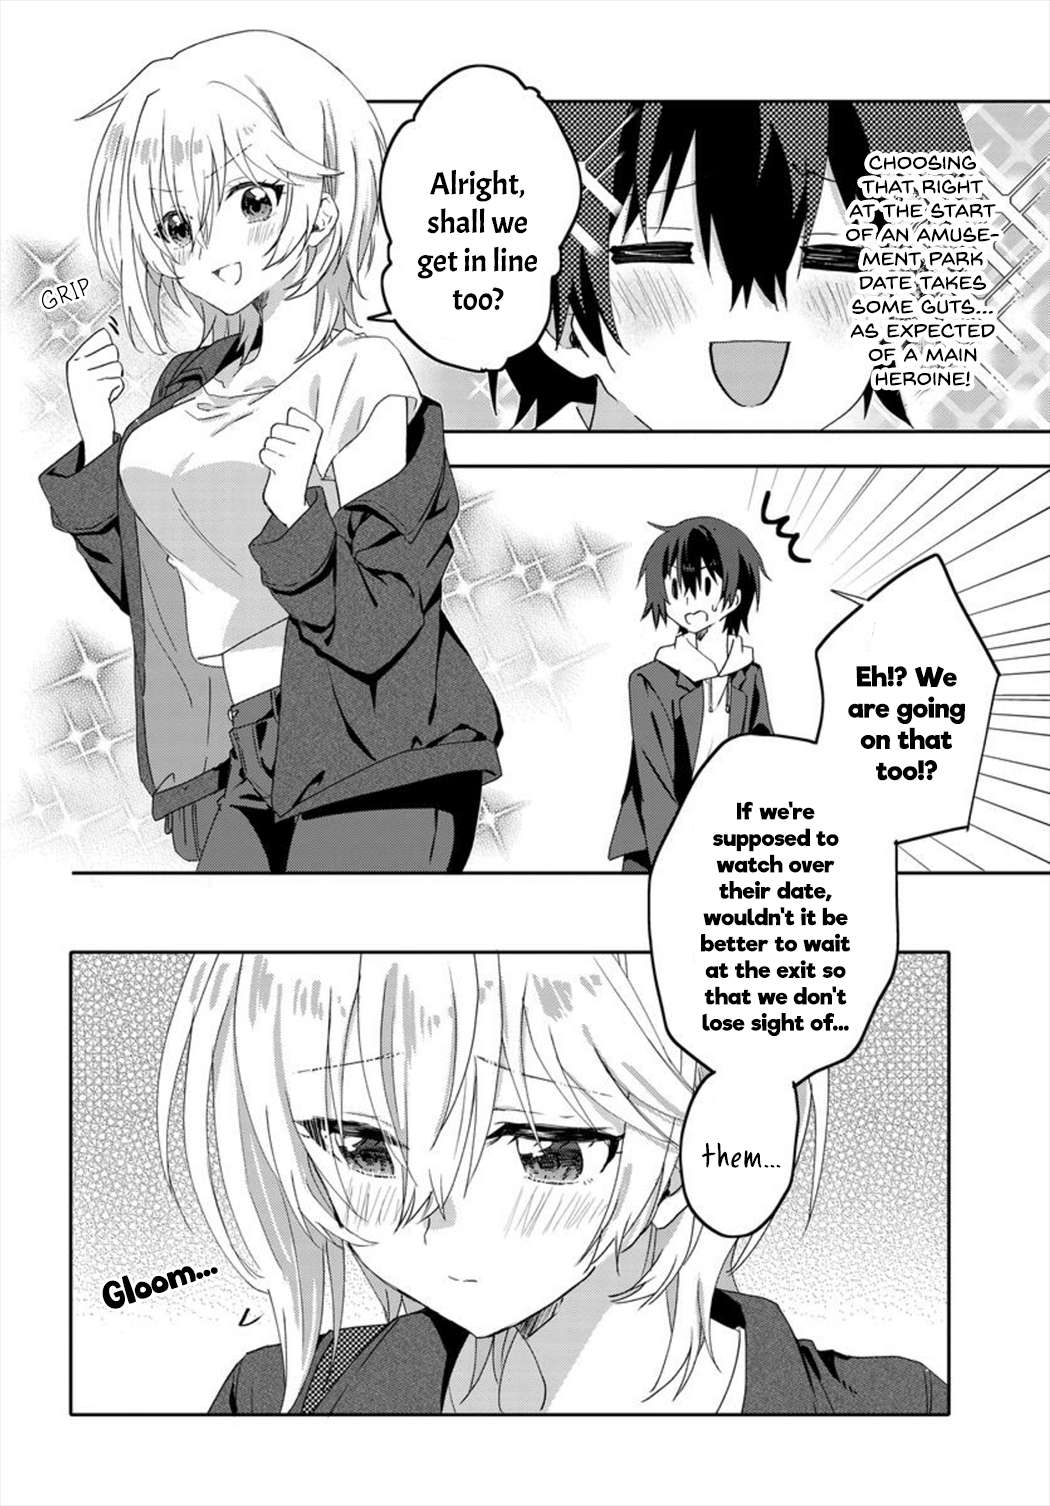 Since I’ve Entered the World of Romantic Comedy Manga, I’ll Do My Best to Make the Losing Heroine Happy. - chapter 7.1 - #2